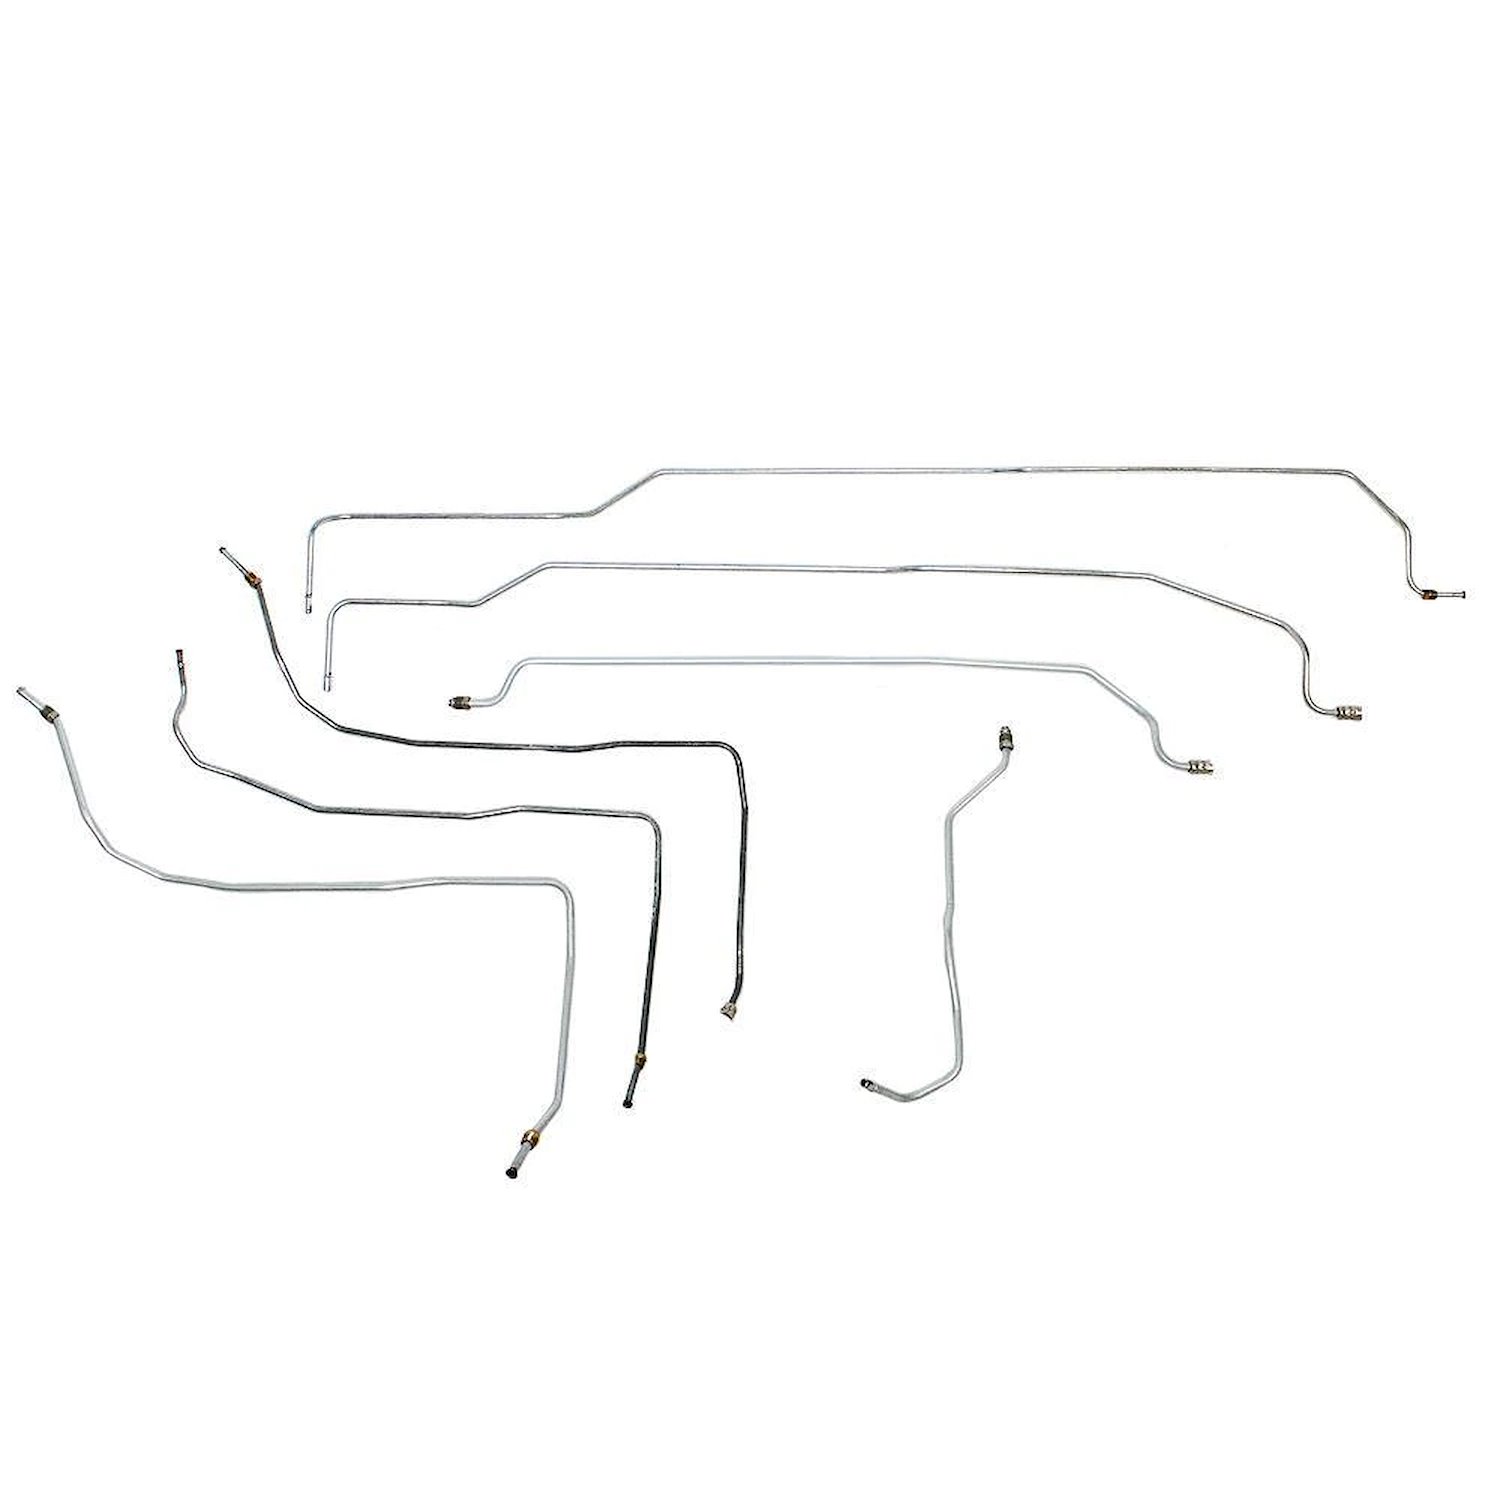 Complete Fuel Line Kit for 2001-2003 GM 2500HD/3500 Crew Cab (Gas) Trucks with Long Bed [Stainless Steel]